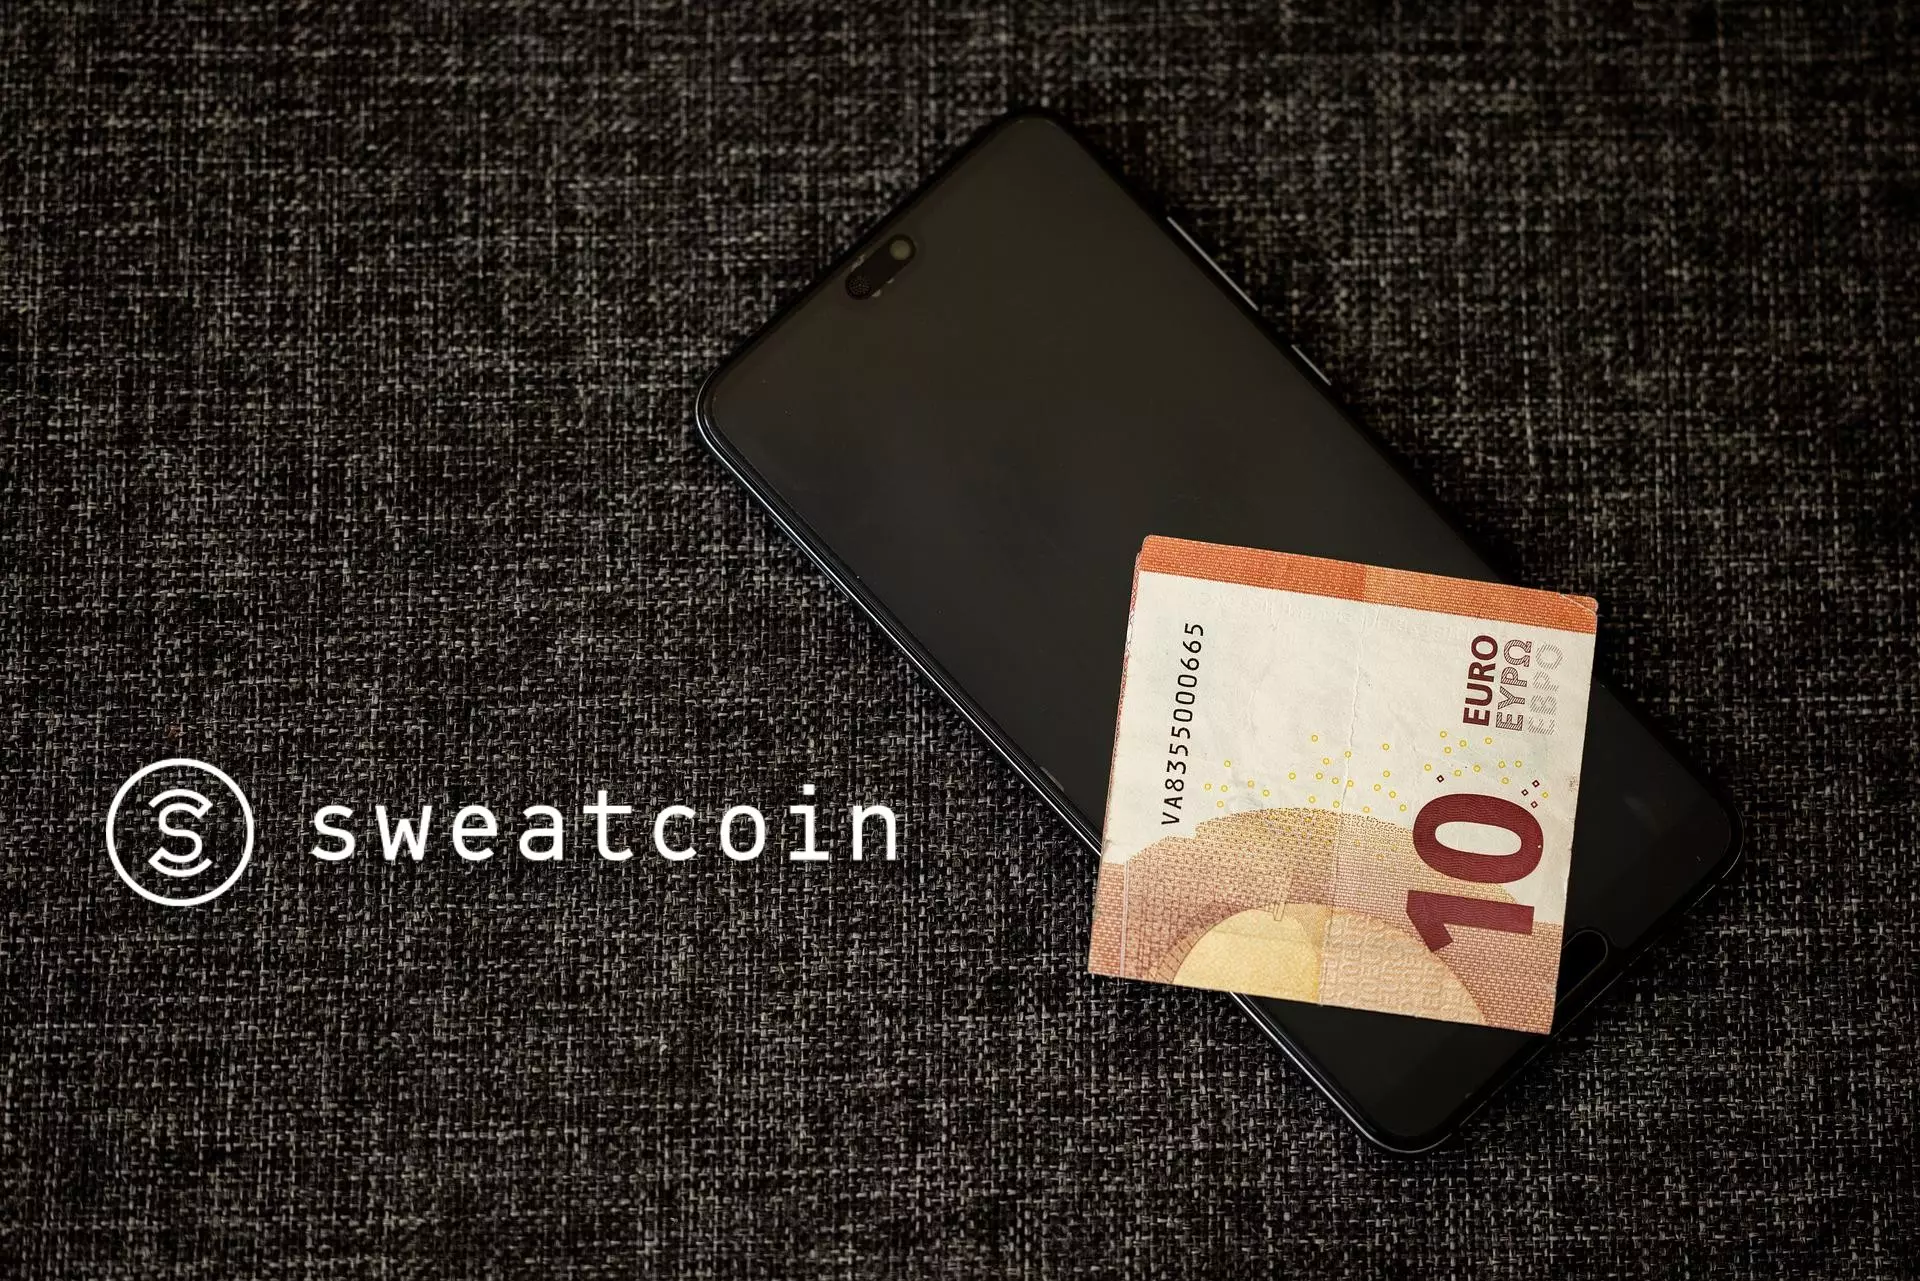 How to transfer money from Sweatcoin to my account